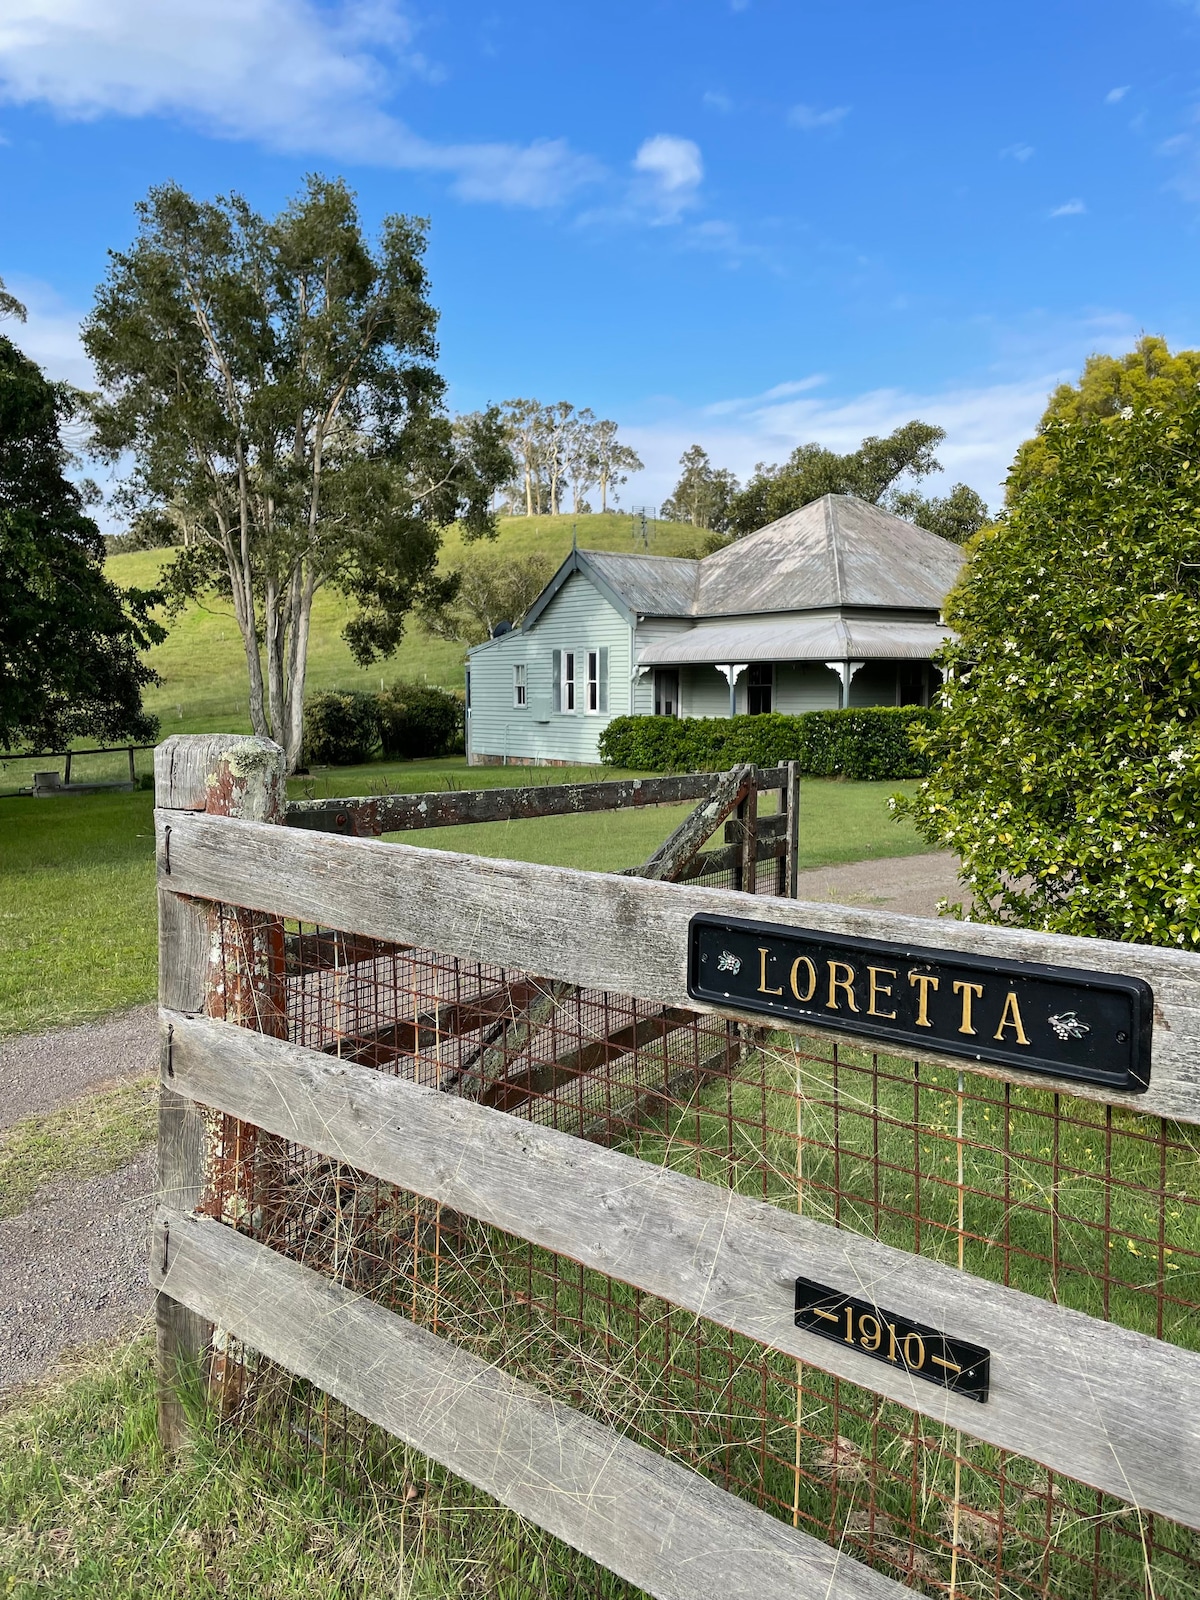 "Loretta" a rustic country cottage